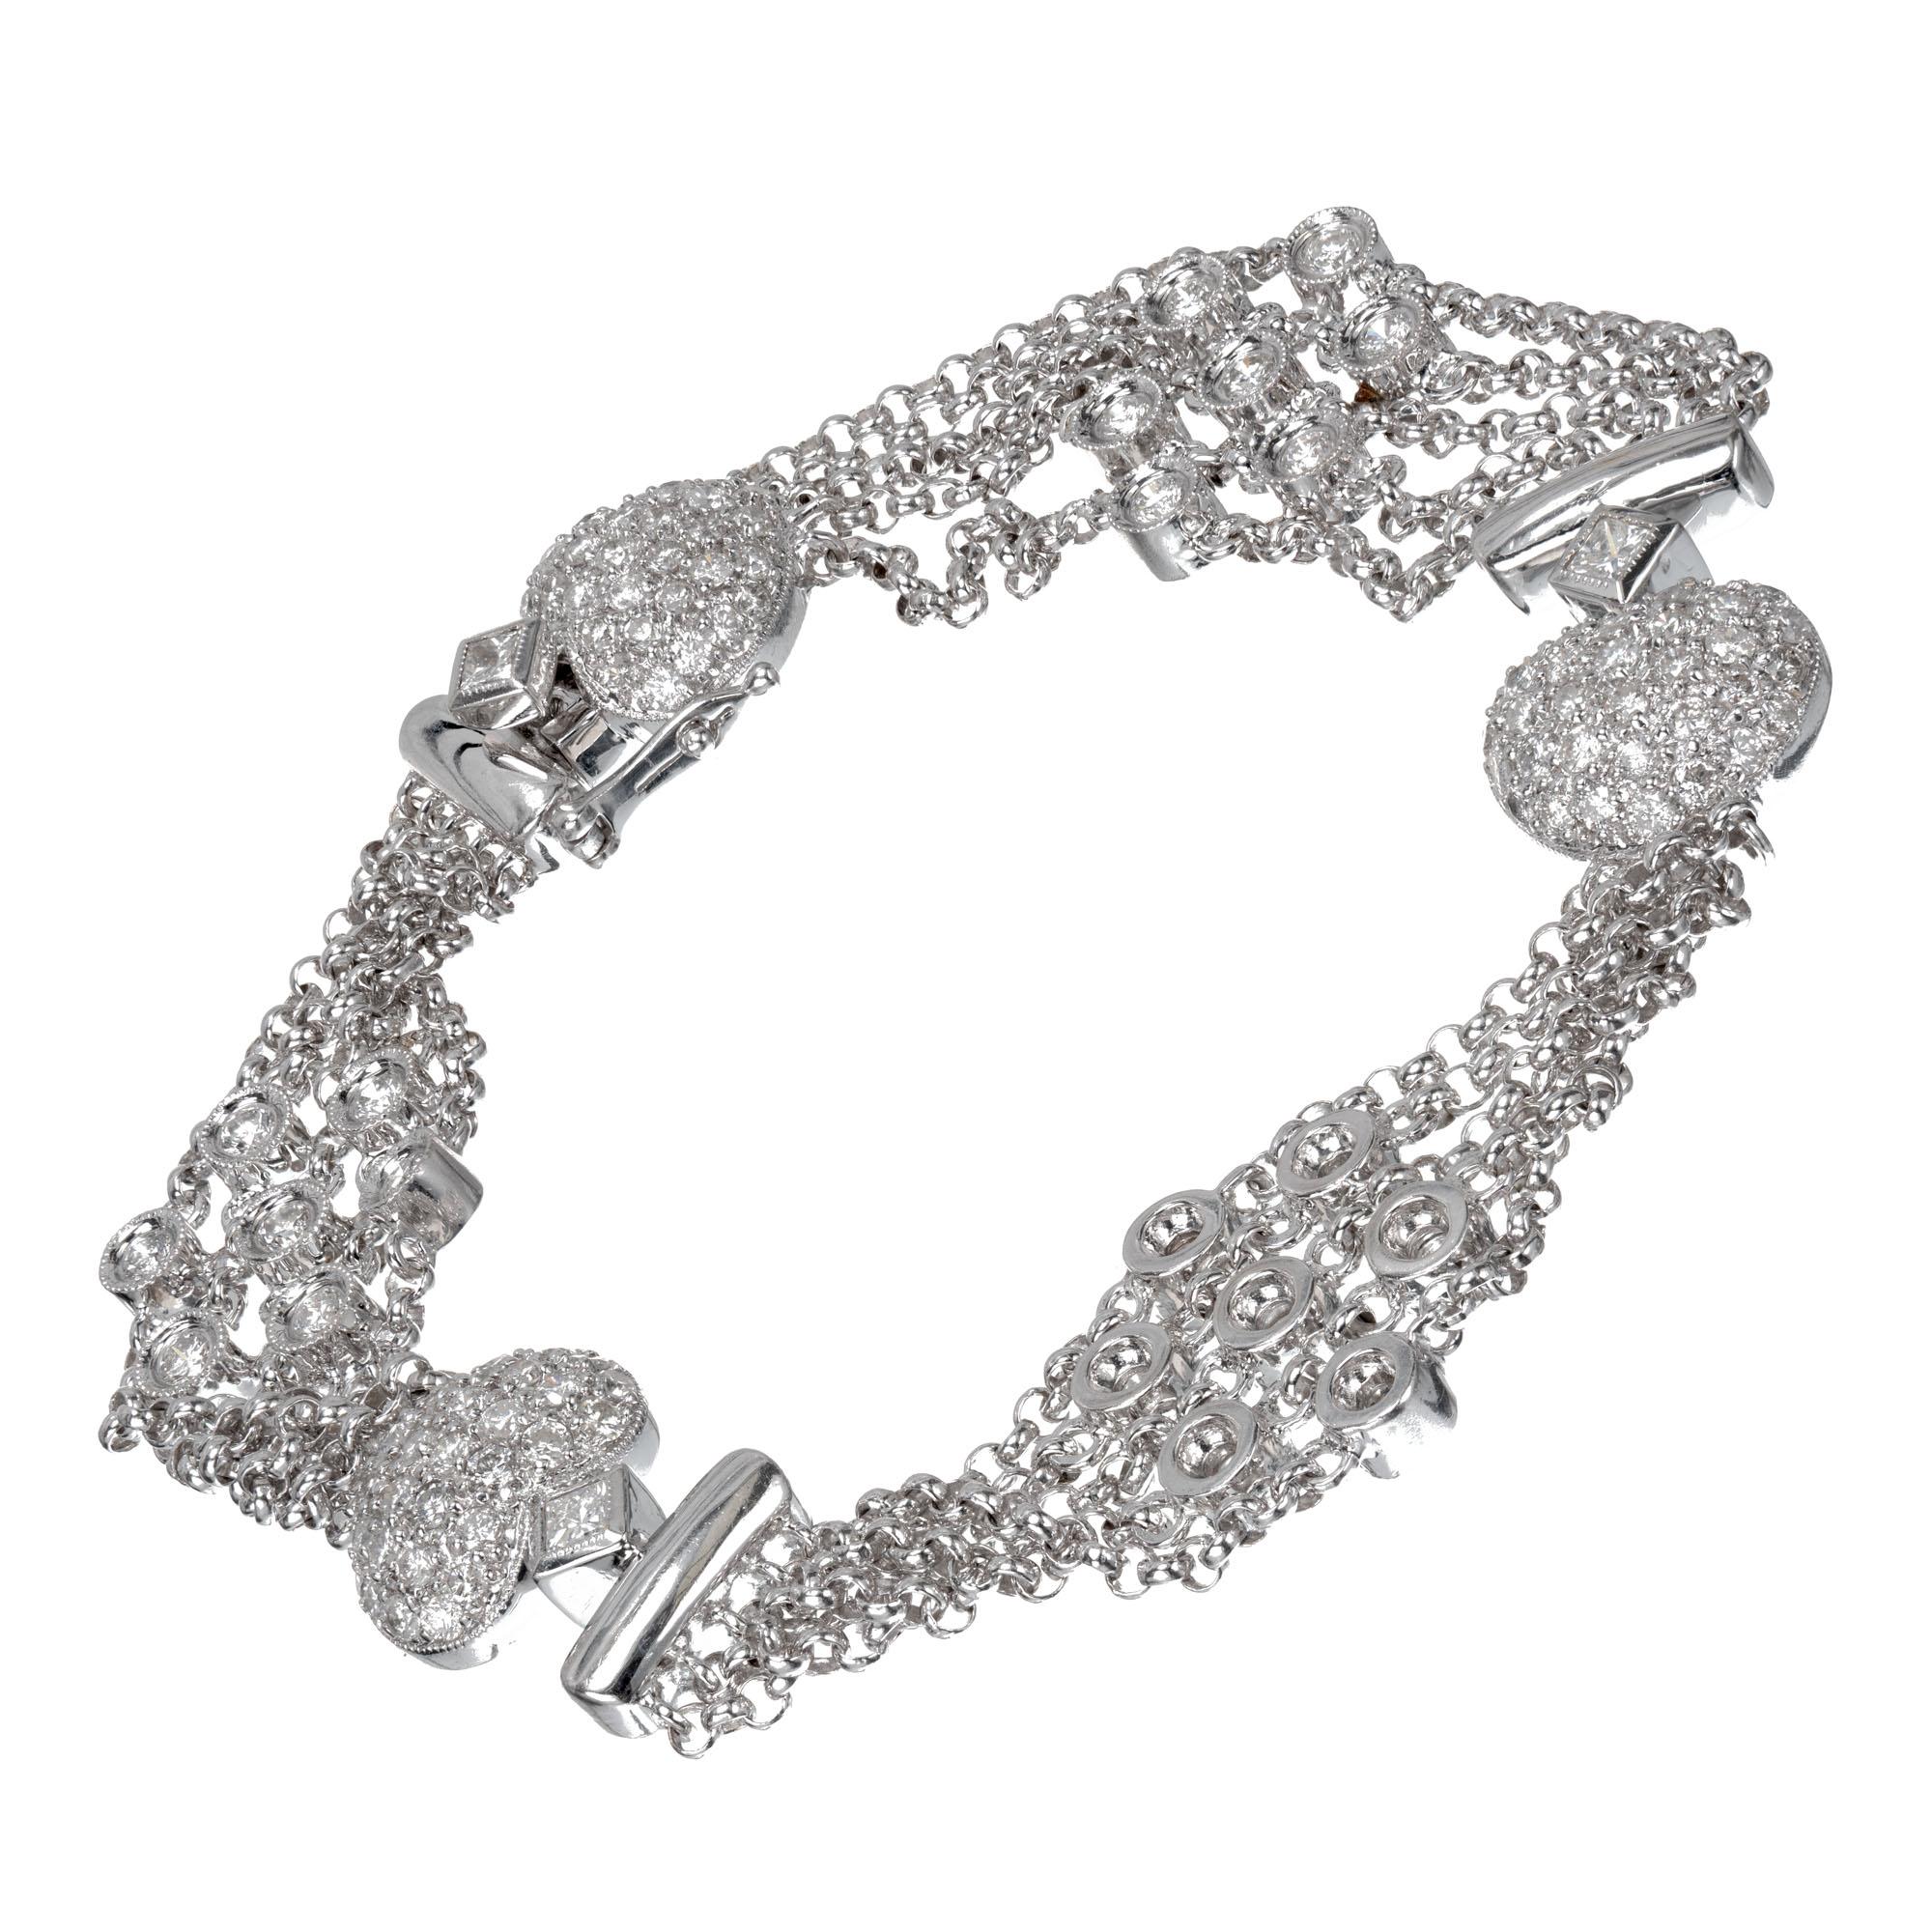 Five row multi-strand 18k white gold diamond link bracelet with heart shaped diamond spacers. Hidden built in catch. 

21 round brilliant cut diamonds G-H SI, approx.  .63cts
99 round brilliant cut diamonds H-I SI-I, approx. .99cts
3 princess cut